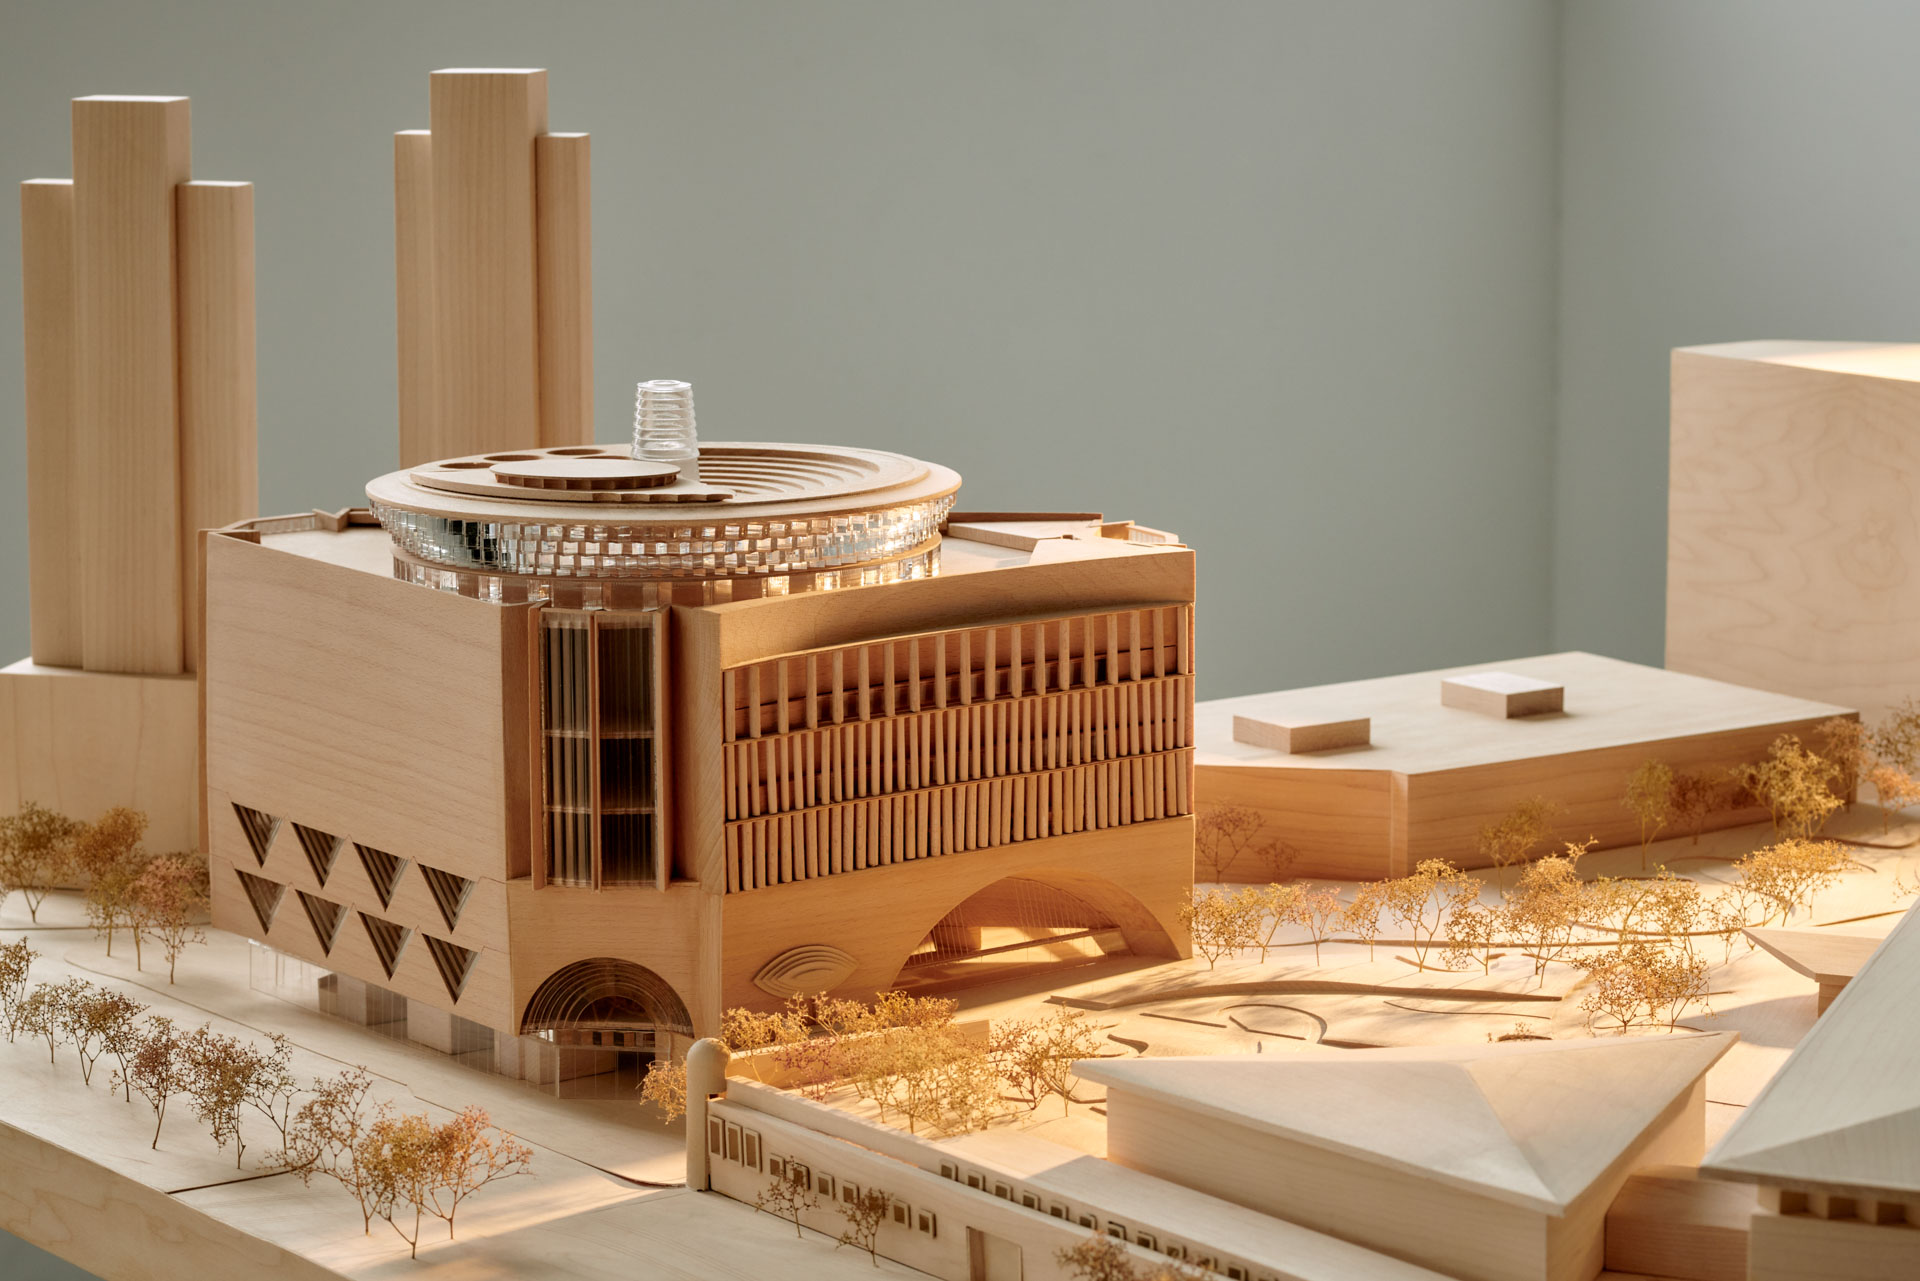 Winning Timber Competition Model for National Gallery Of Victoria, Candalepus Associates